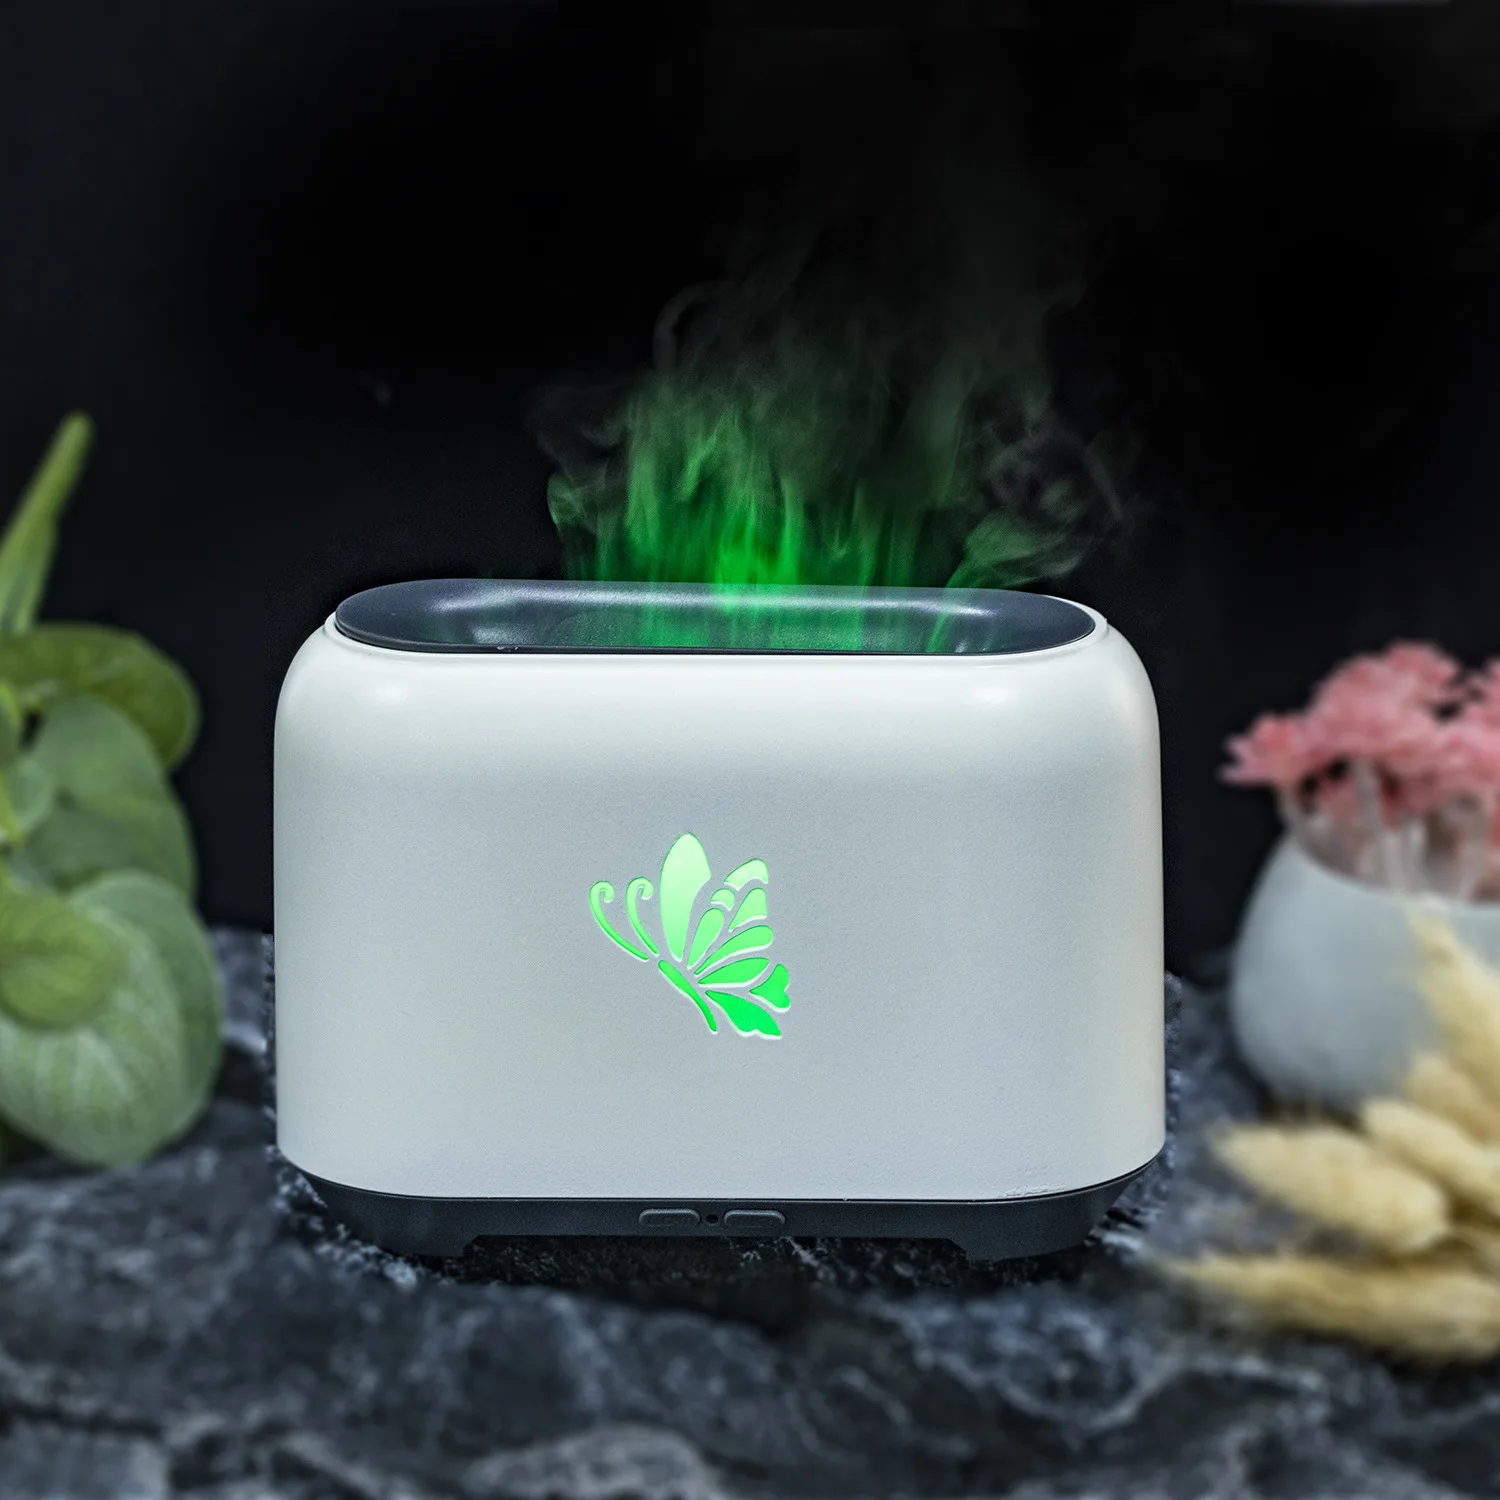 

150ML USB Essential Oil Diffuser Simulation Flame Ultrasonic Humidifier Home Office Air Freshener Fragrance Sooth Sleep Atomizer